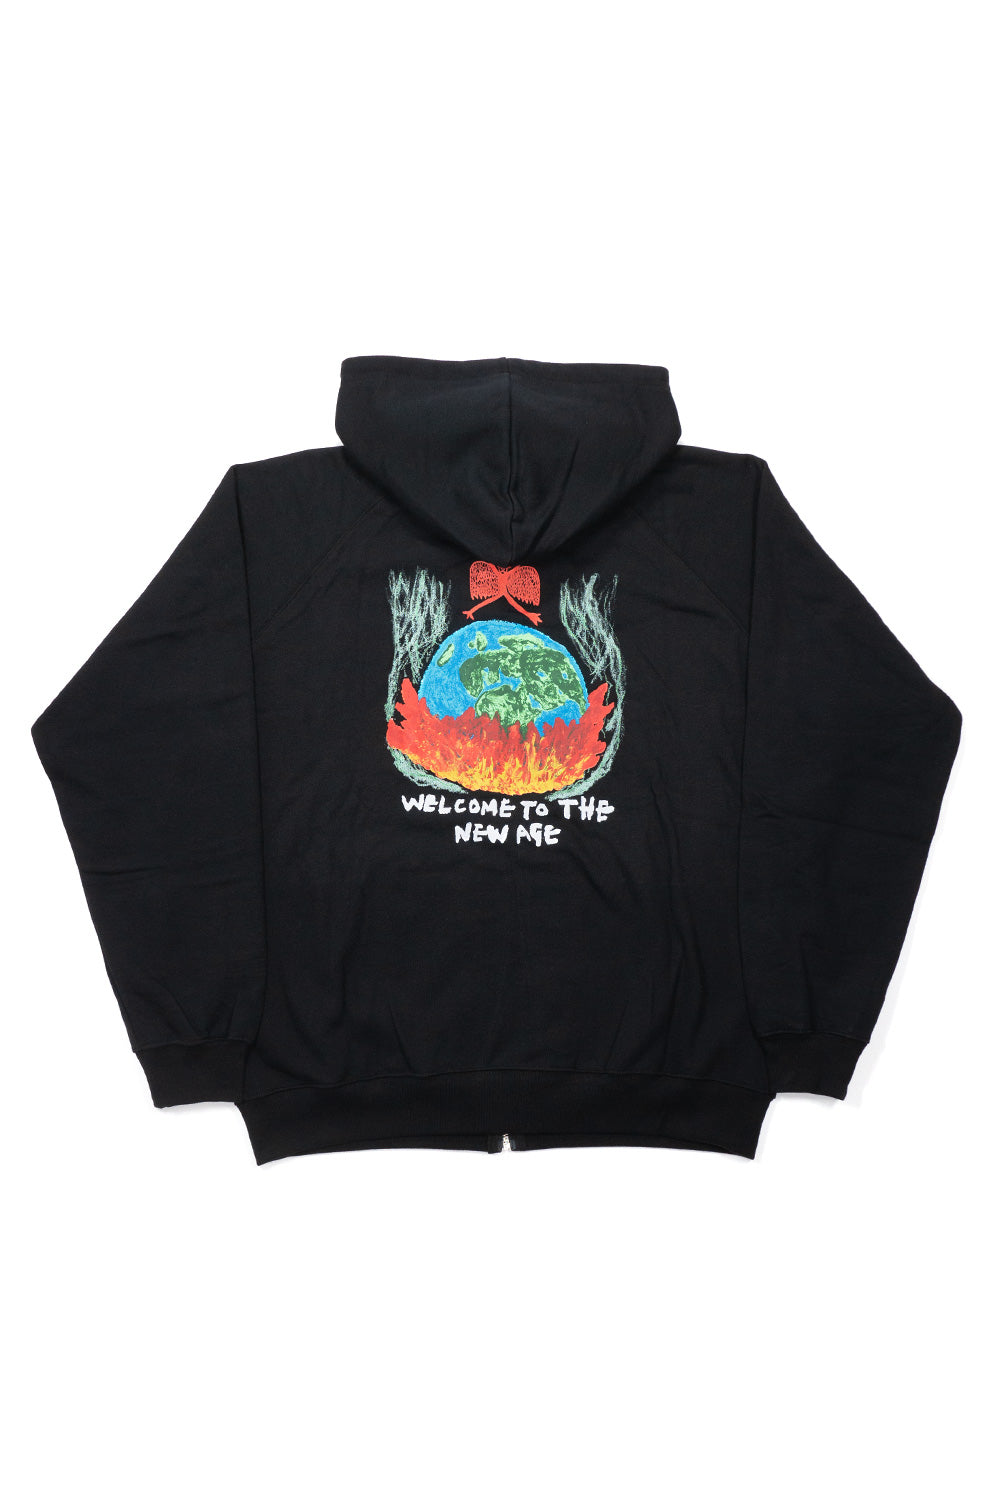 Polar Skate Co. Welcome To The New Age Zip Hoodie Black - BONKERS